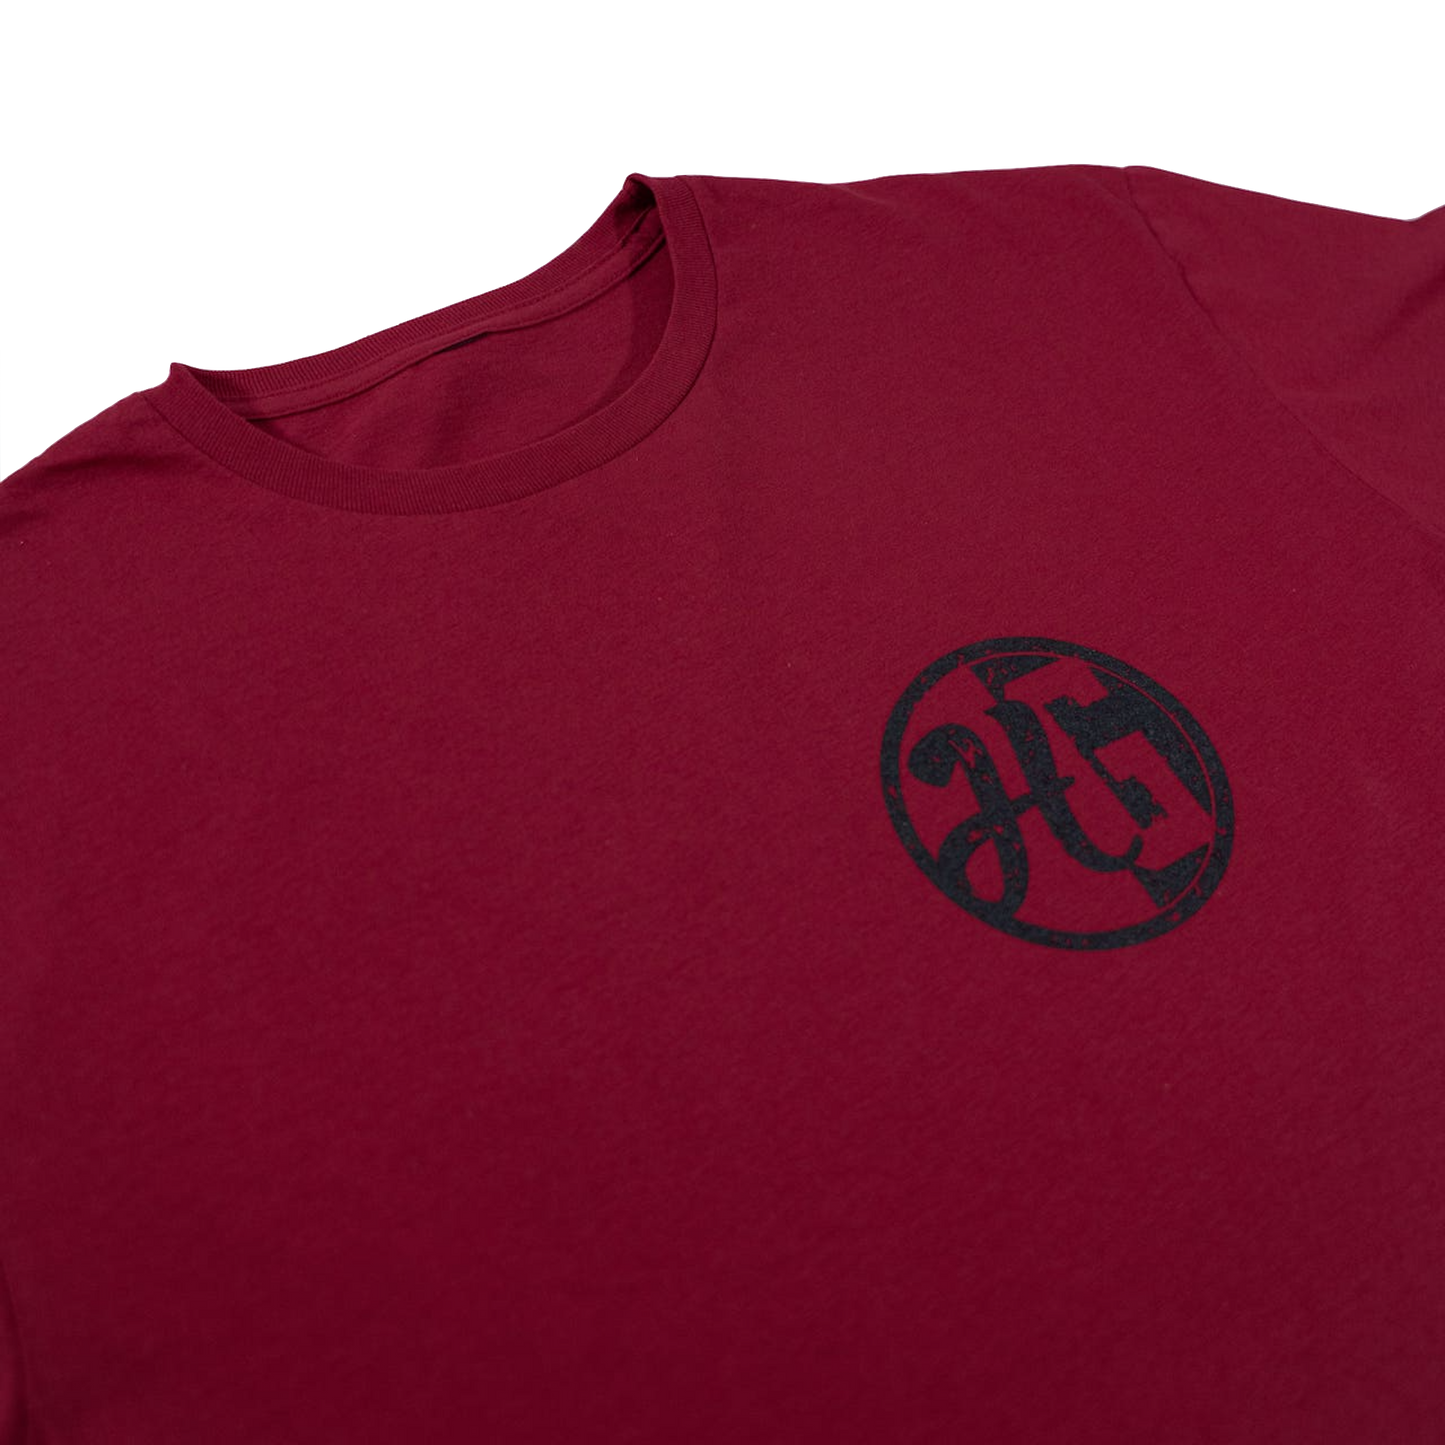 Dark Red with Black lettering  Short Sleeve T-Shirt